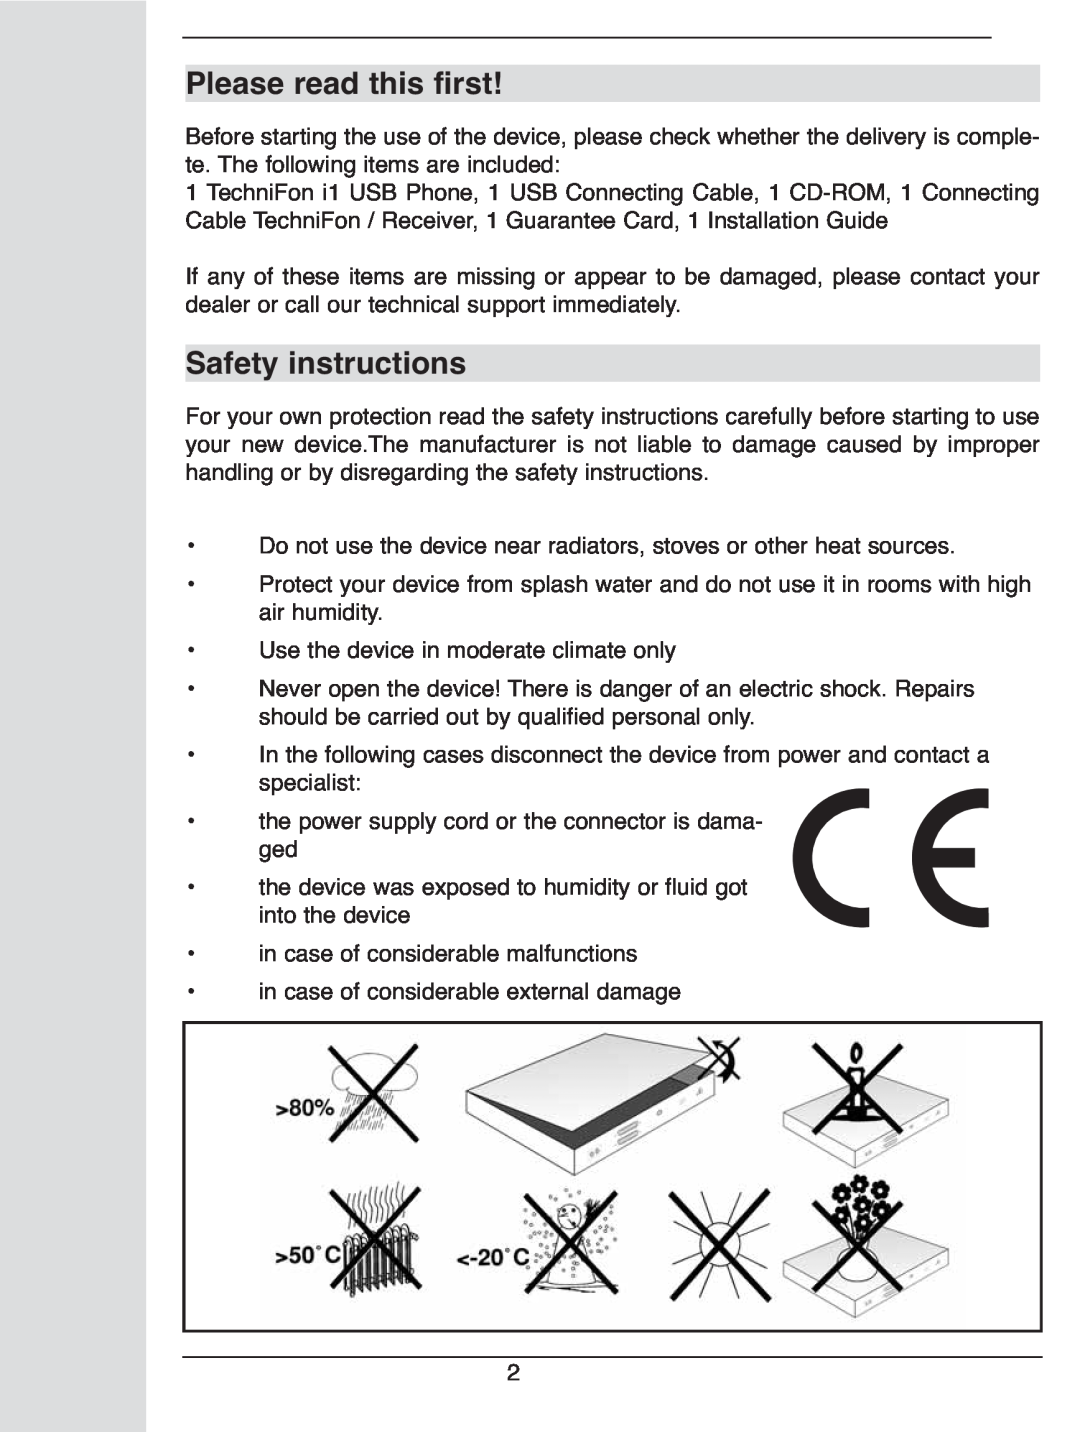 TechniSat i1 user manual Please read this first, Safety instructions 